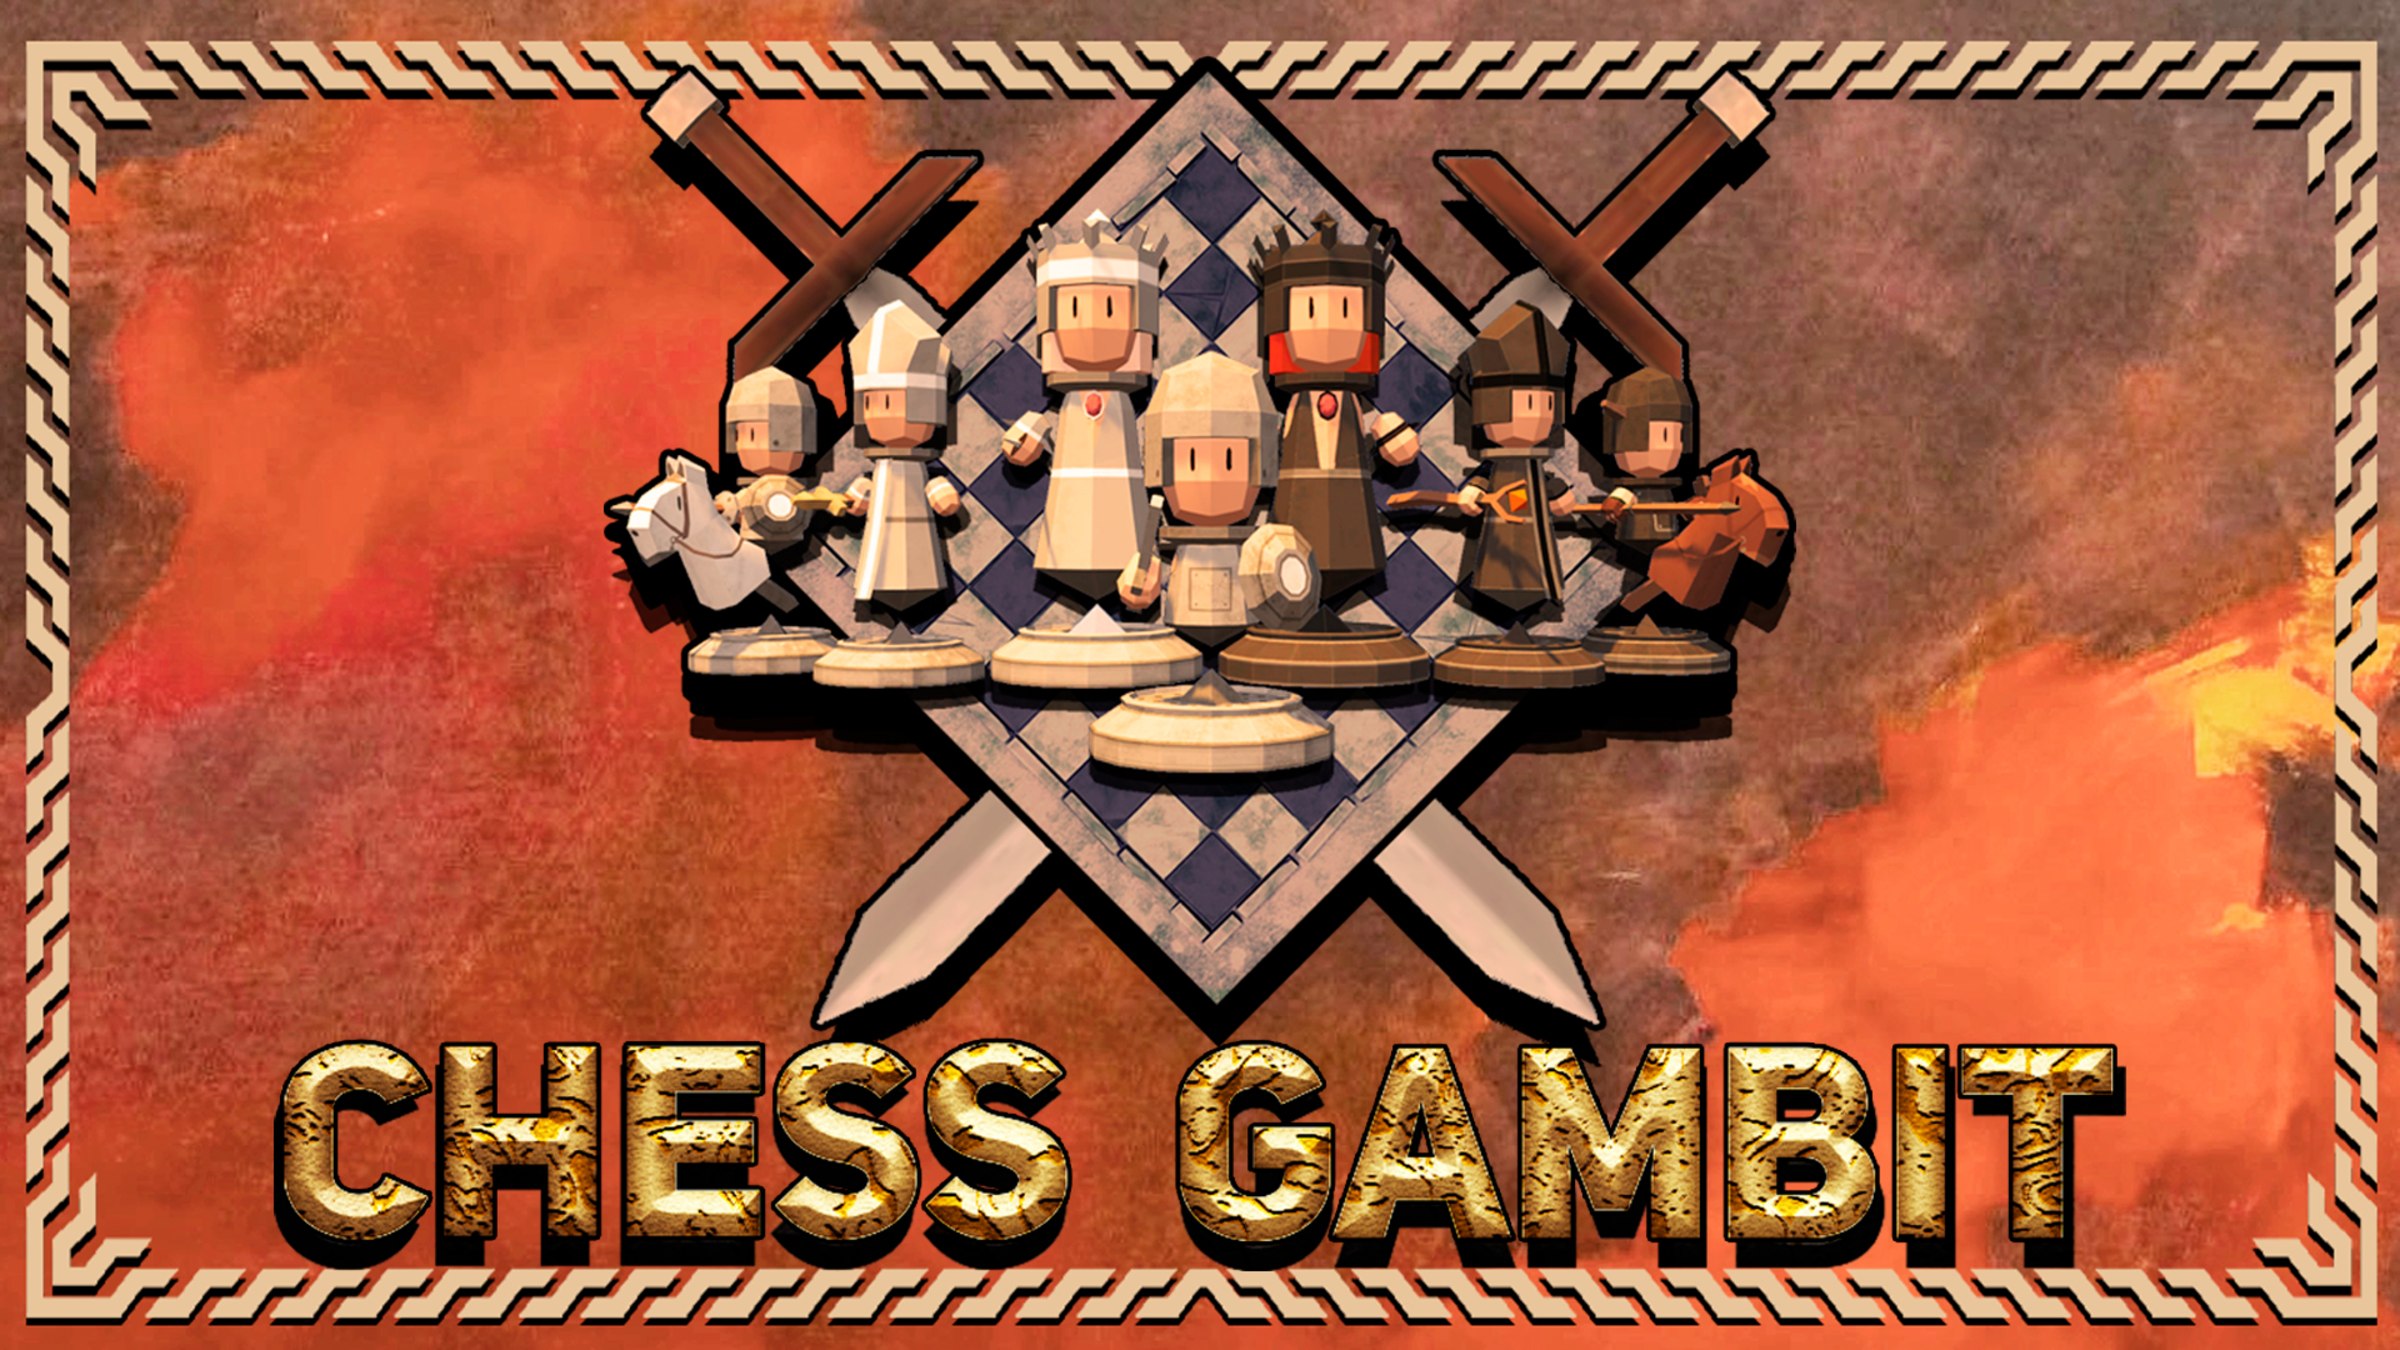 game – The Gambit Chess Player